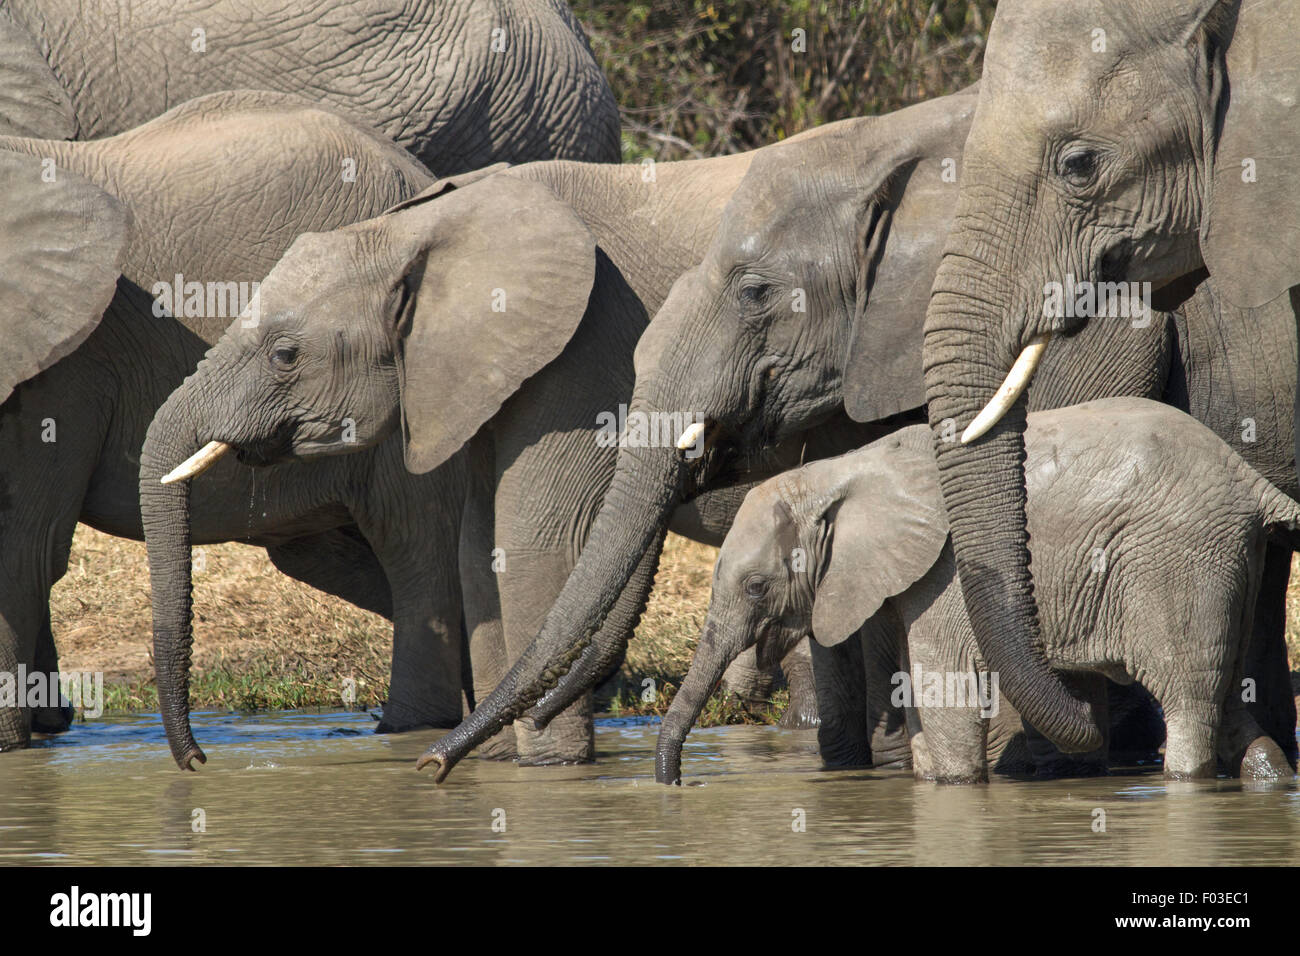 African Elephants drinking water in Kruger National Park, South Africa Stock Photo